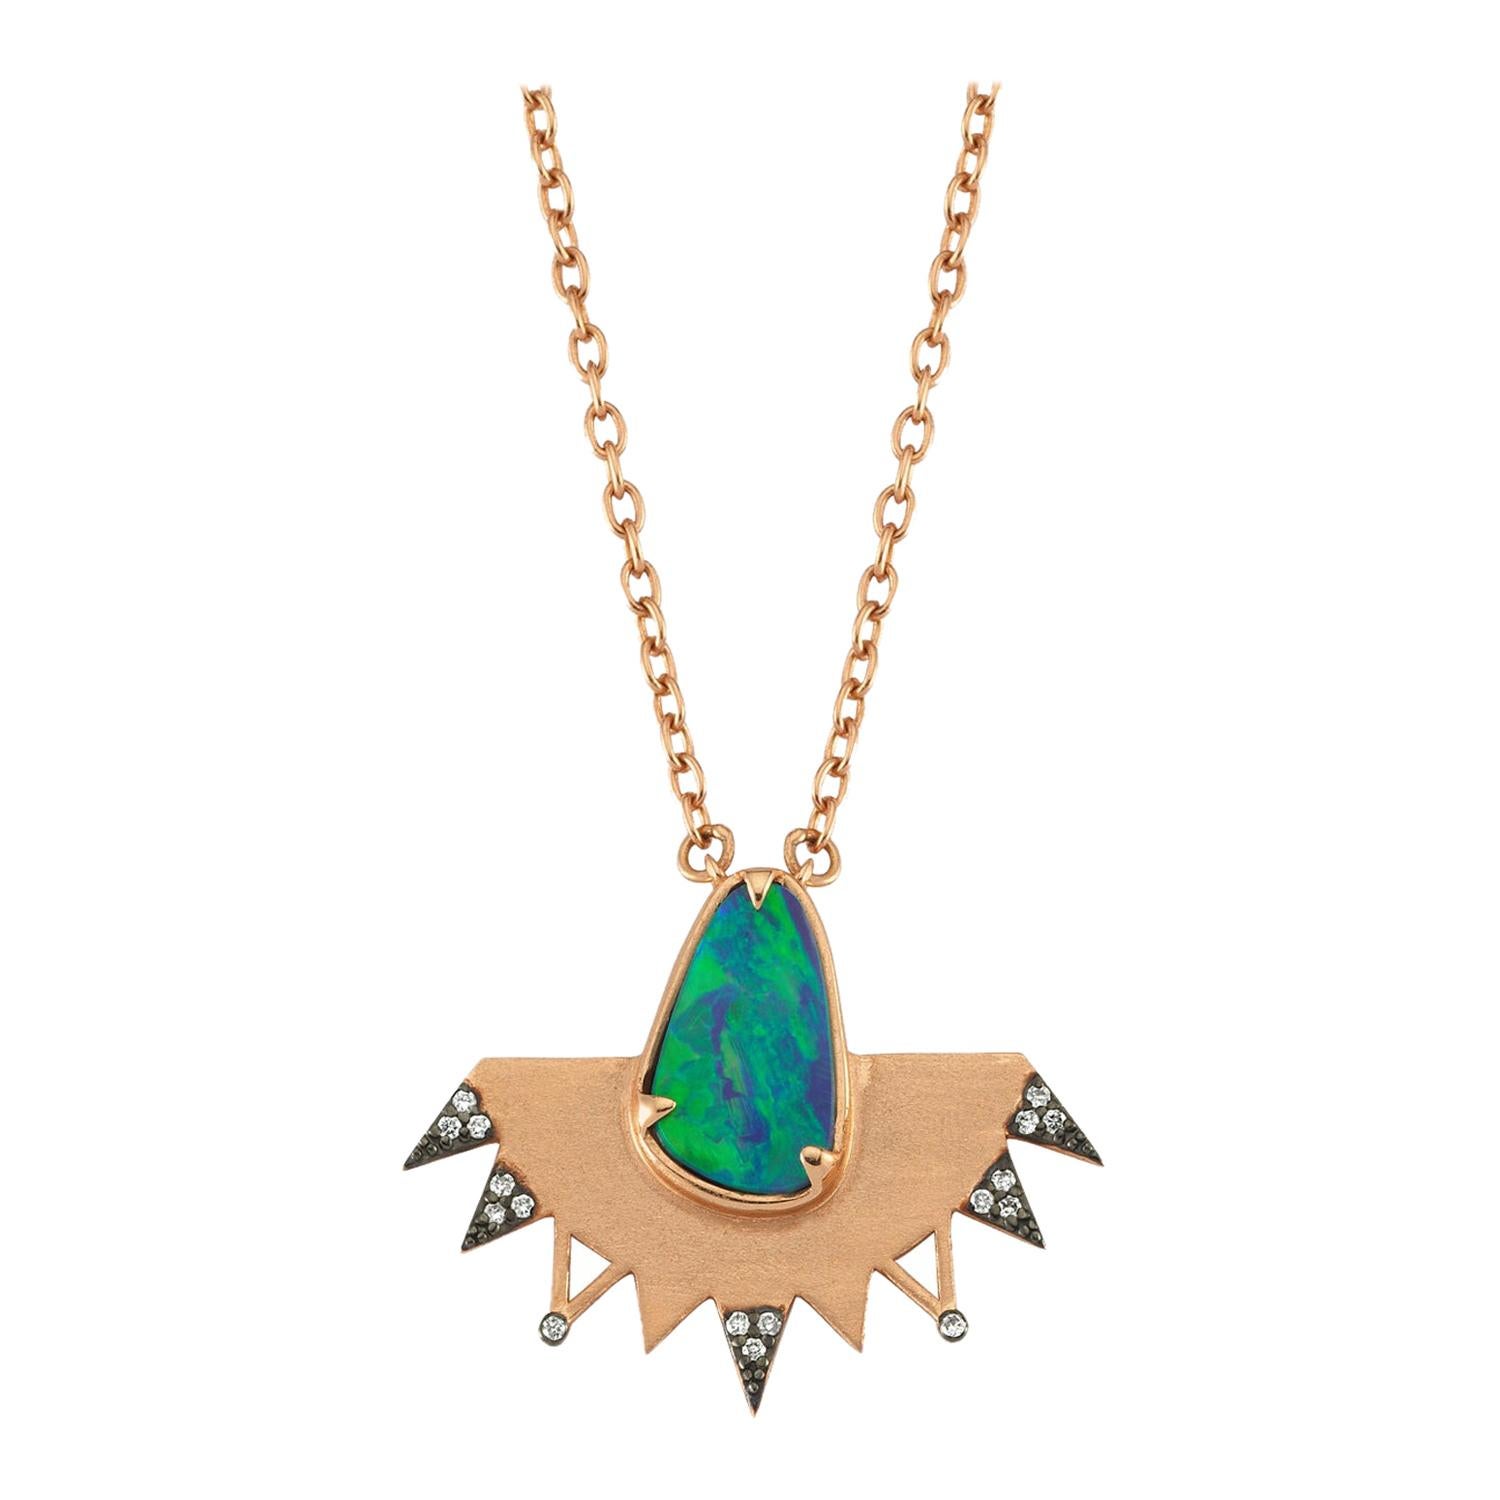 Aisa Blue Opal Necklace in 14 Karat Rose Gold with White Diamond